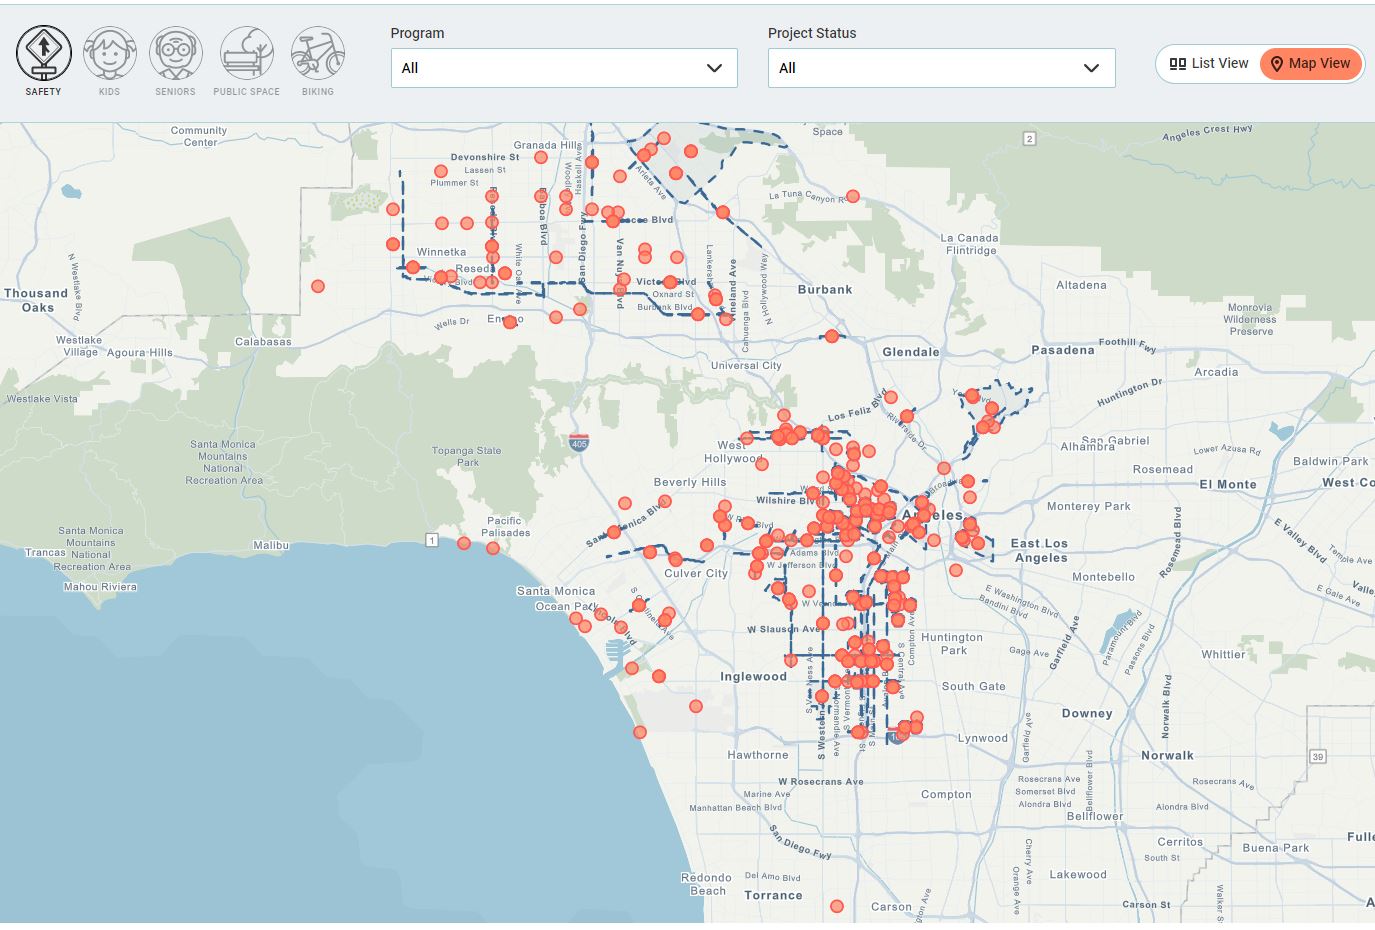 Map of Safety Projects in Los Angeles